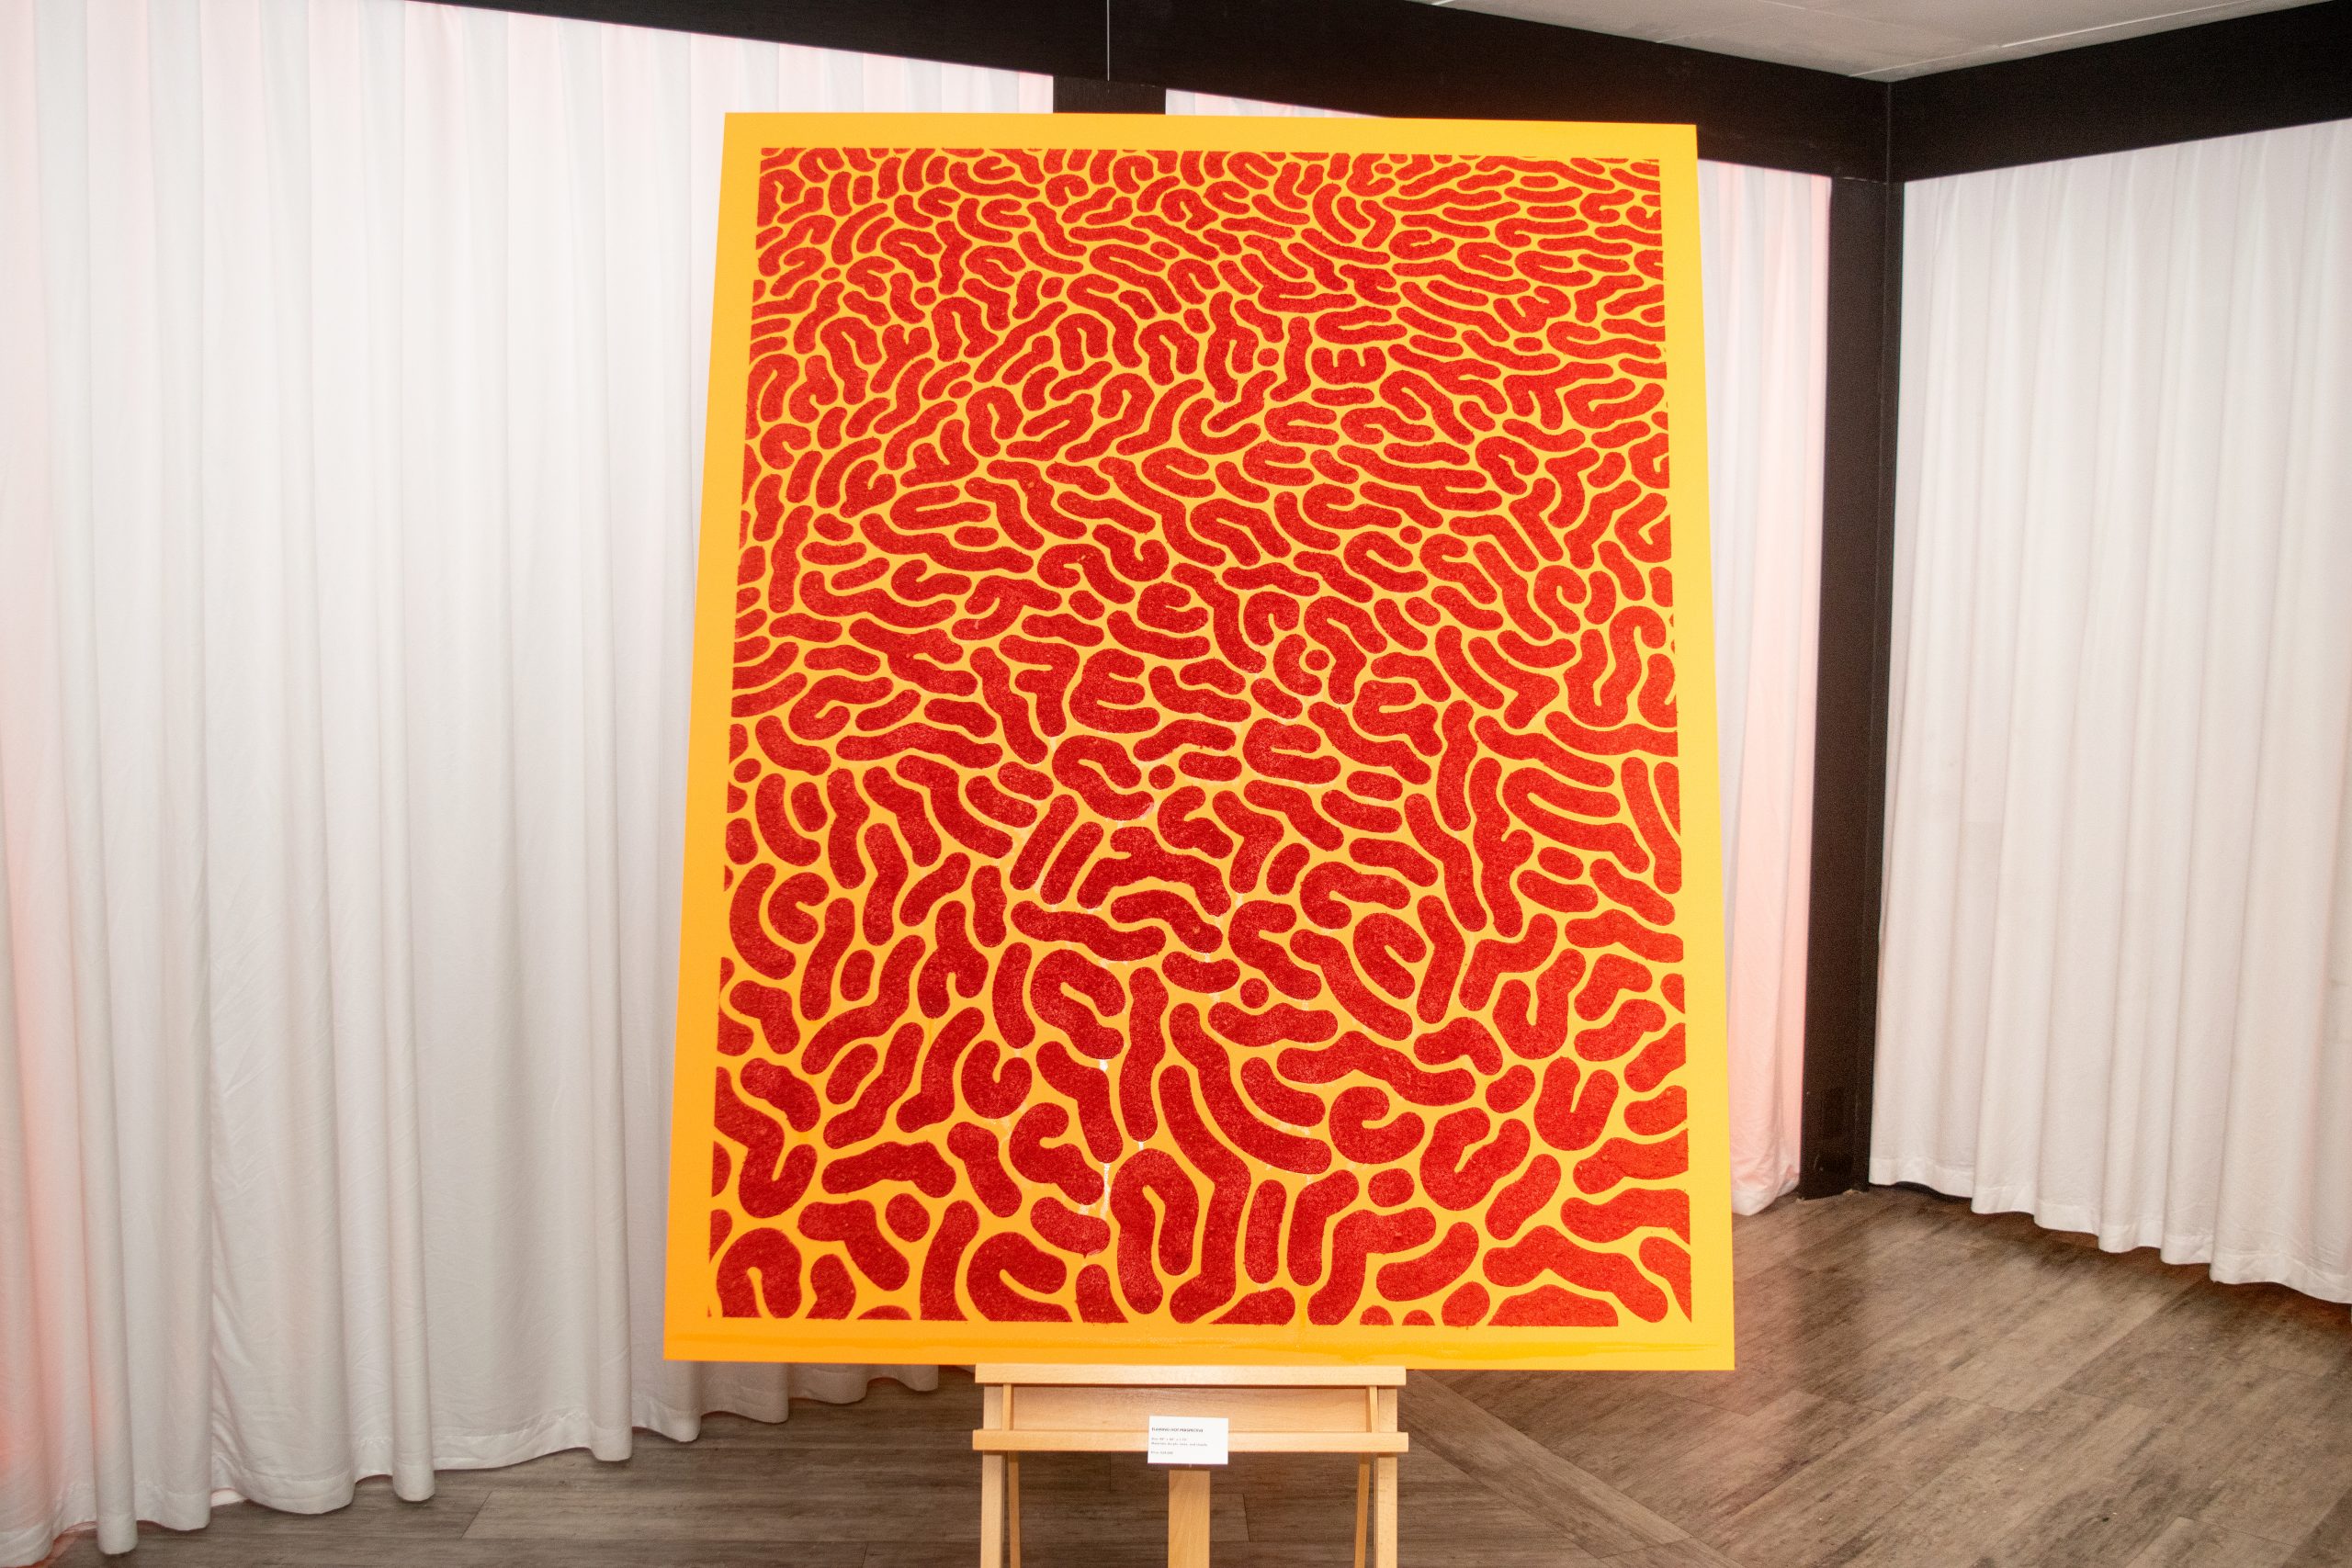 Art Basel to feature Cheetos dust exhibition on mega-yacht